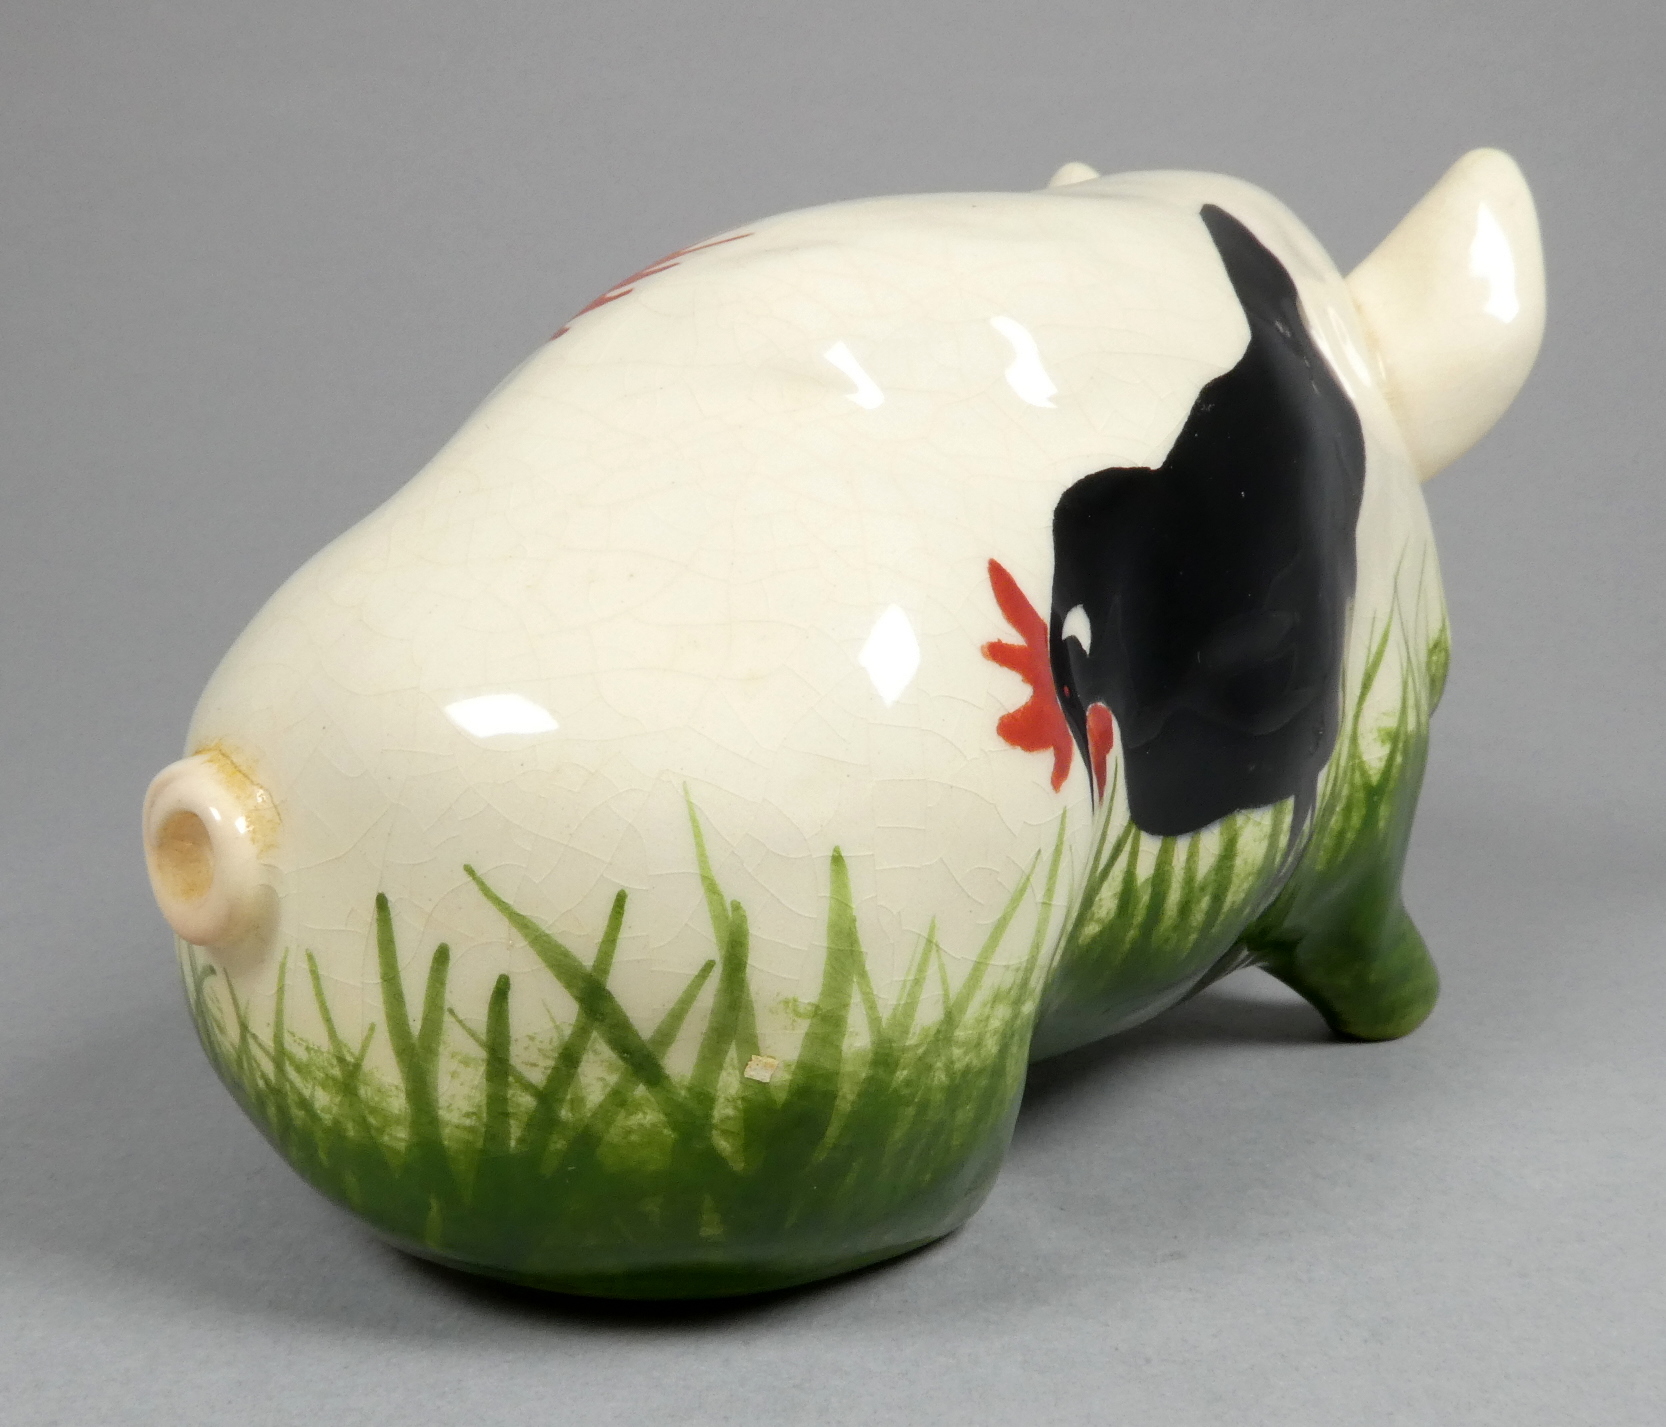 A Wemyss Griselda Hill pottery pig - seated, decorated with black chickens, width 18cm. - Image 4 of 5